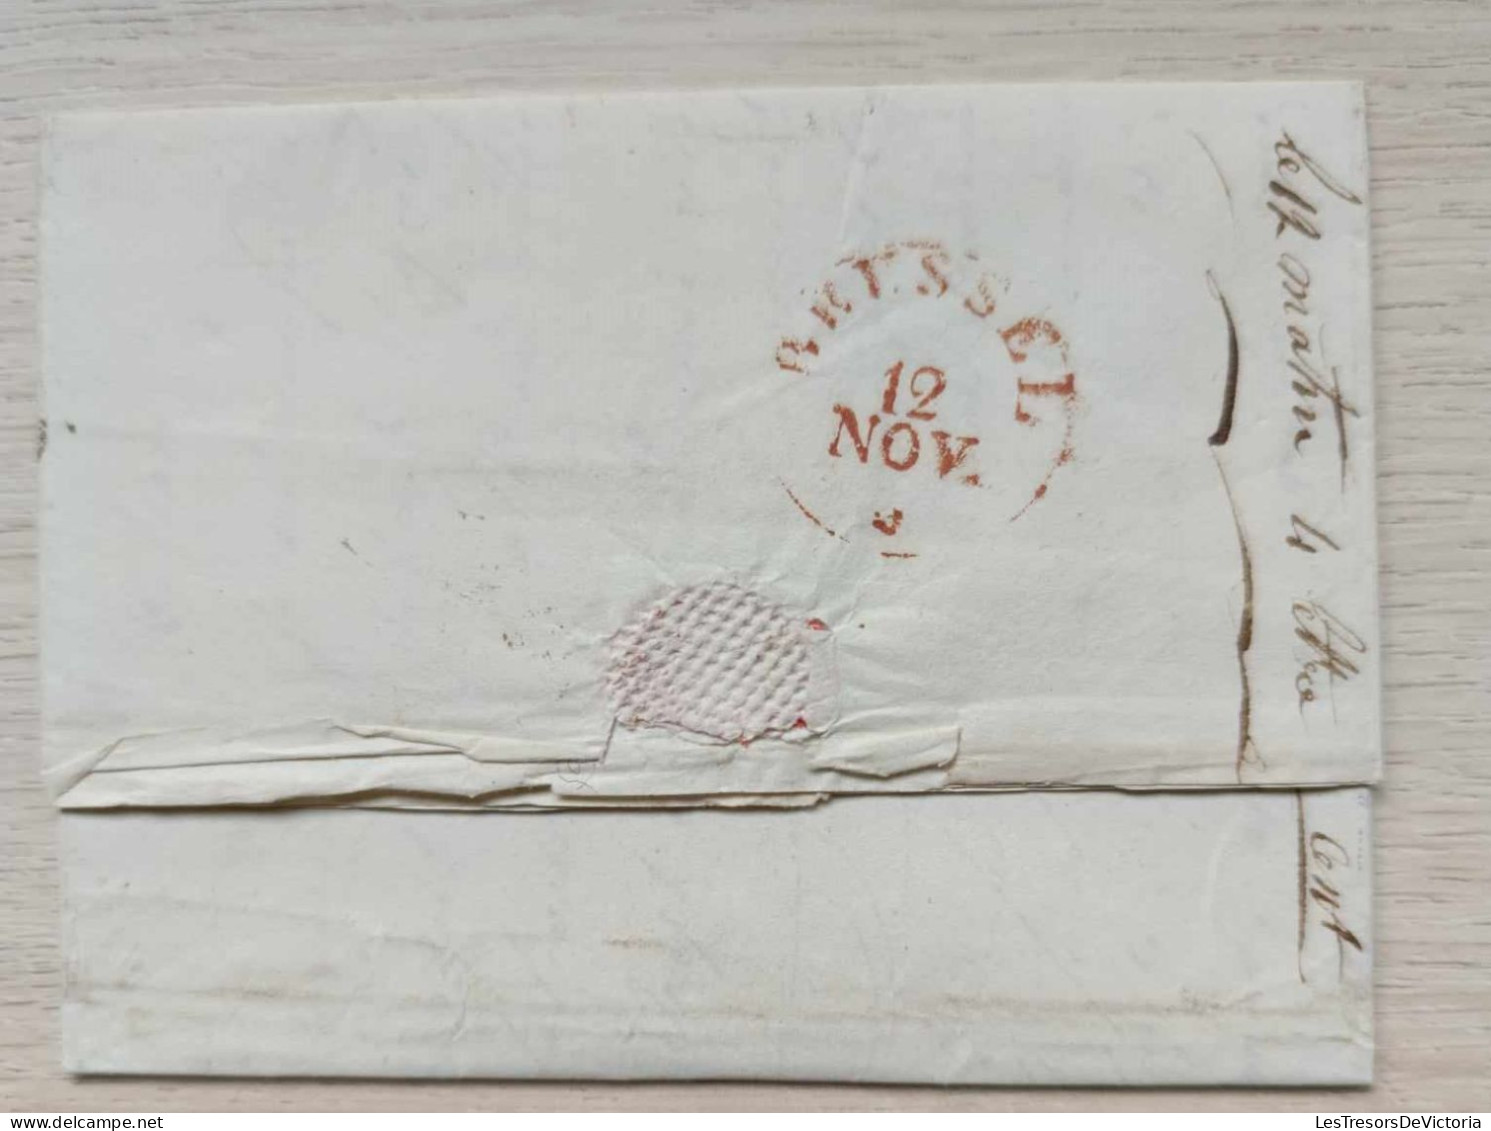 Belgique - Letter From Verviers Mailed On November 21st 1829 To Brussels - Weight 16ws Wigtjes - 1815-1830 (Periodo Olandese)